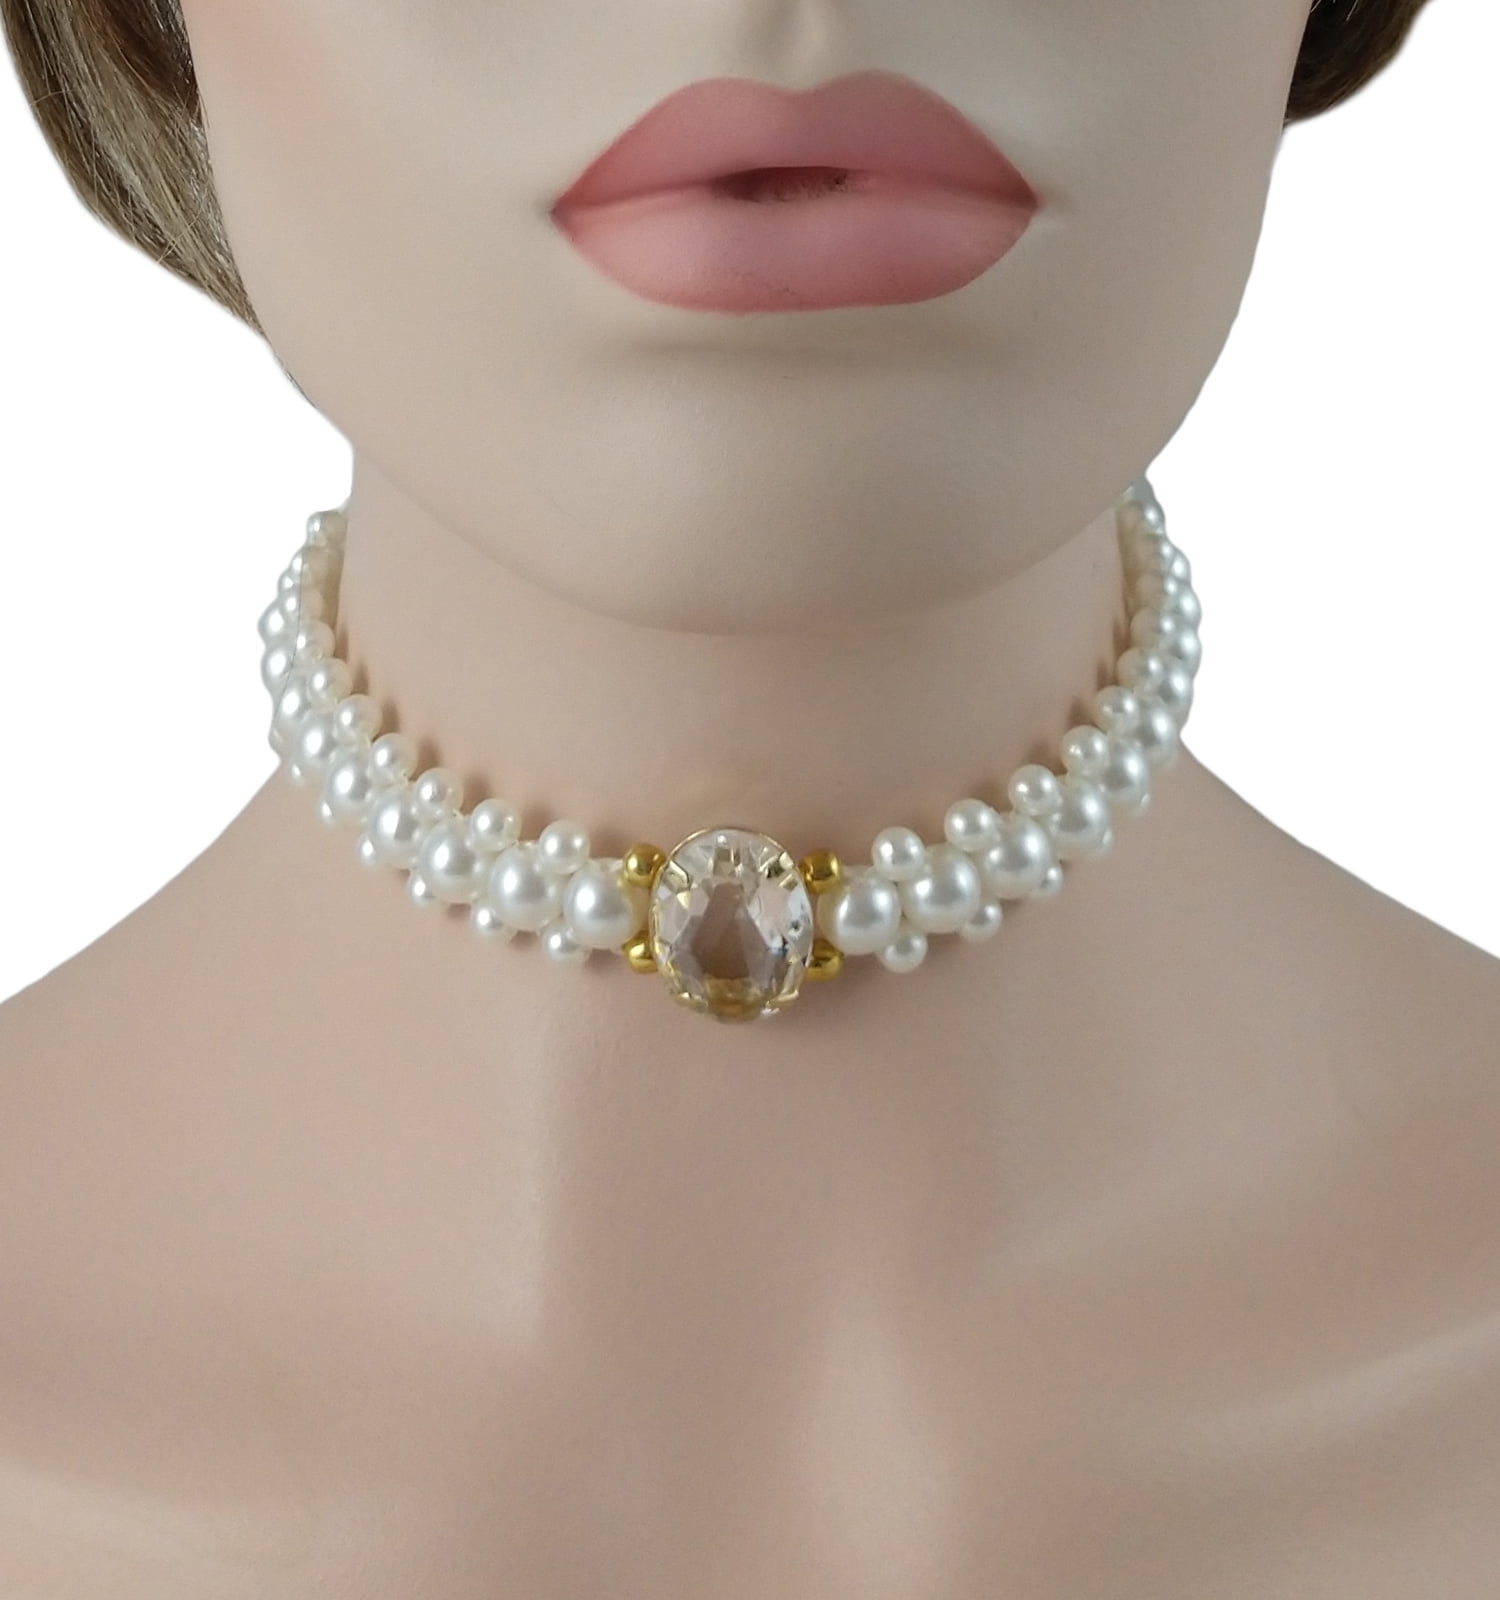 Beaded Choker Necklace - Pearl Choker - Bead and Pearl Necklace - Lulus